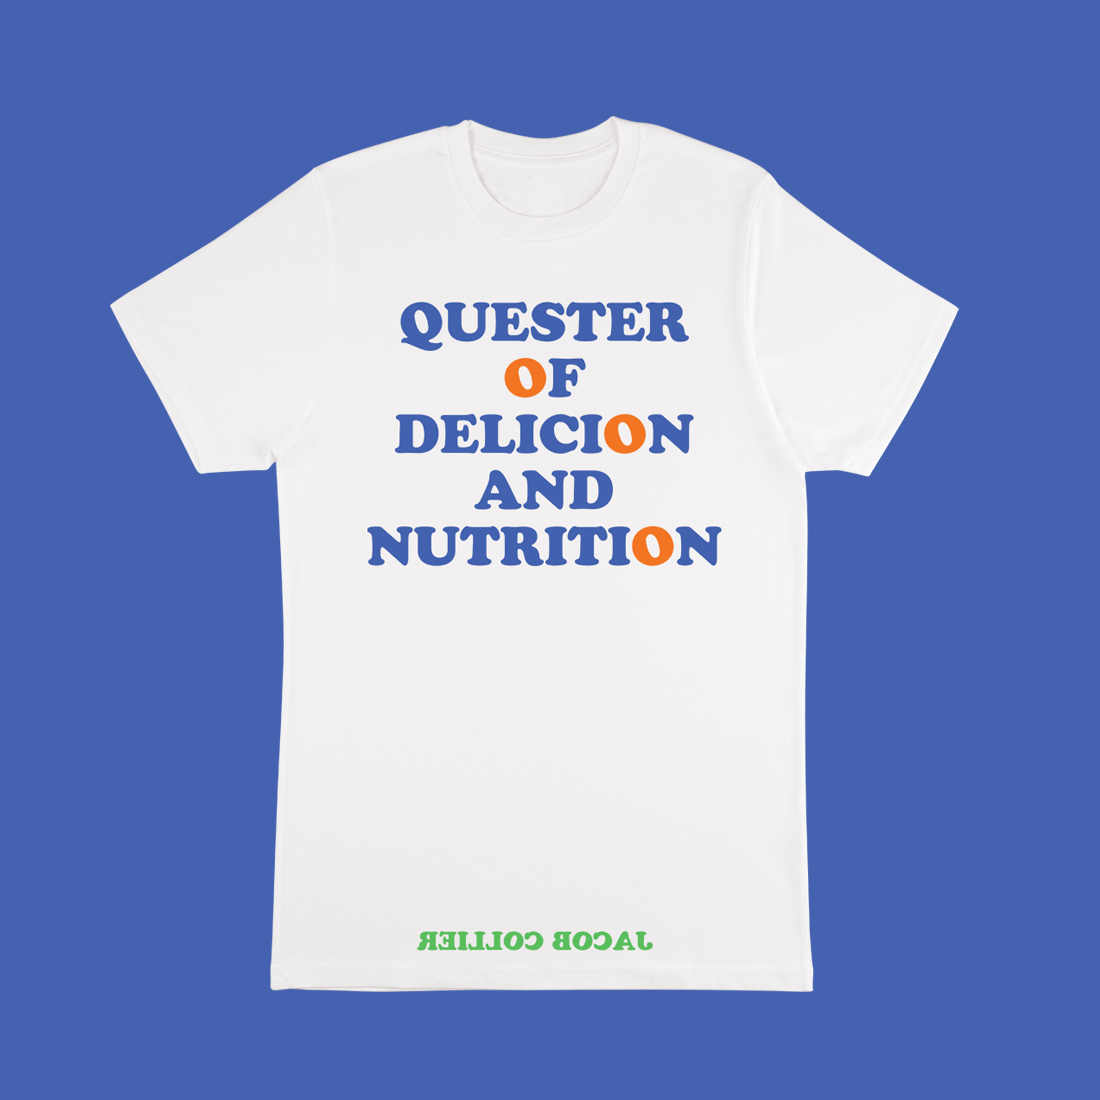 Quester of Delicion and Nutrition T-shirt